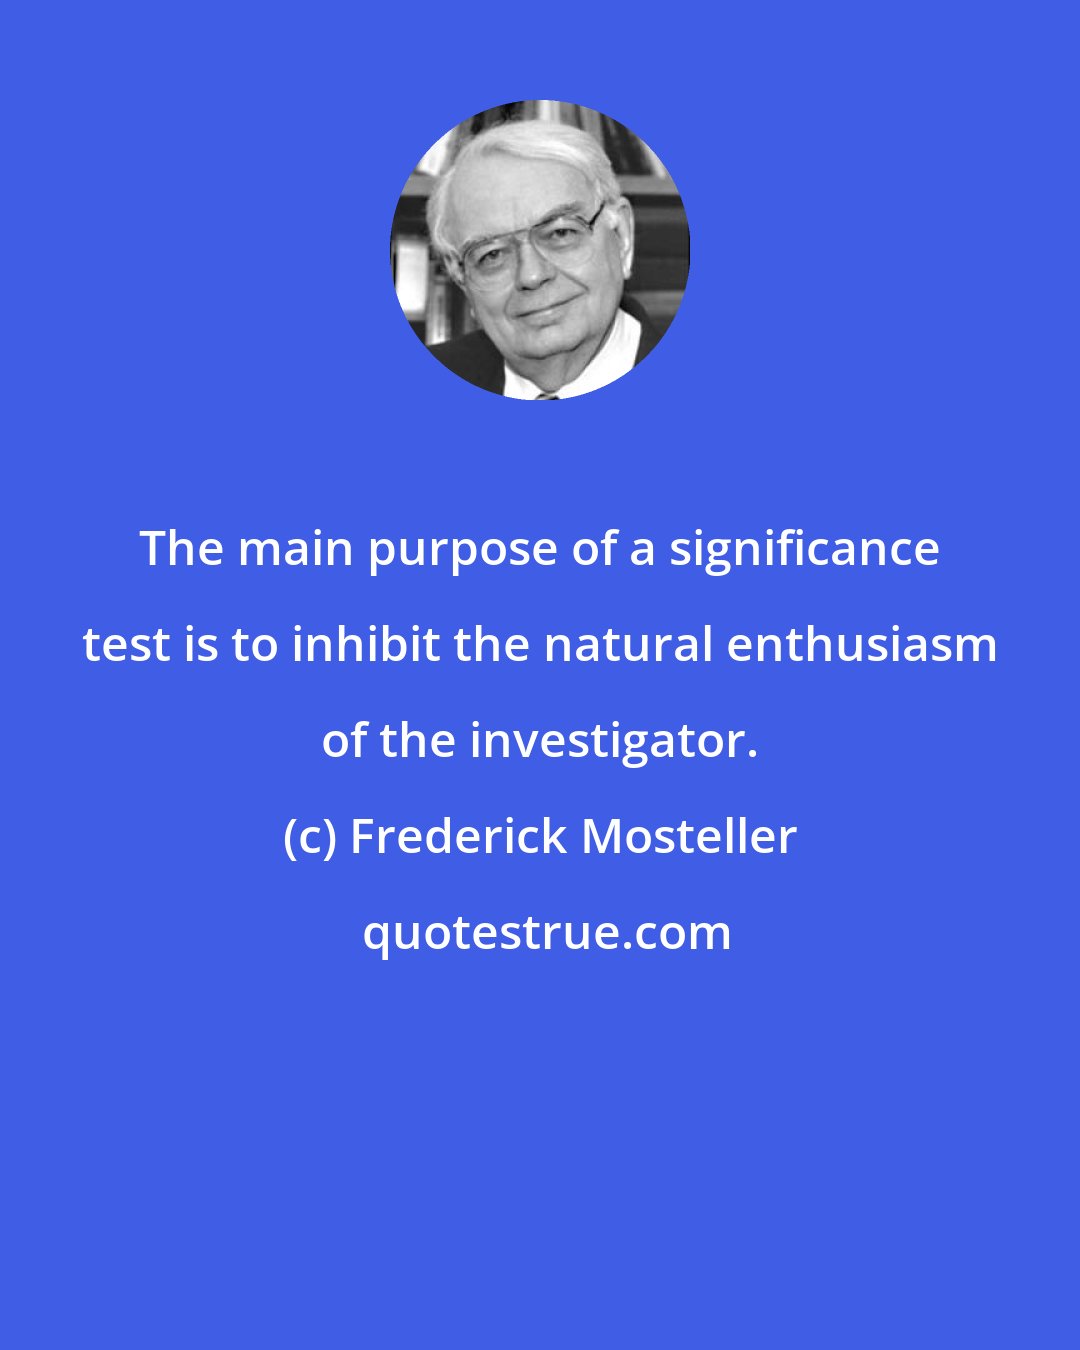 Frederick Mosteller: The main purpose of a significance test is to inhibit the natural enthusiasm of the investigator.